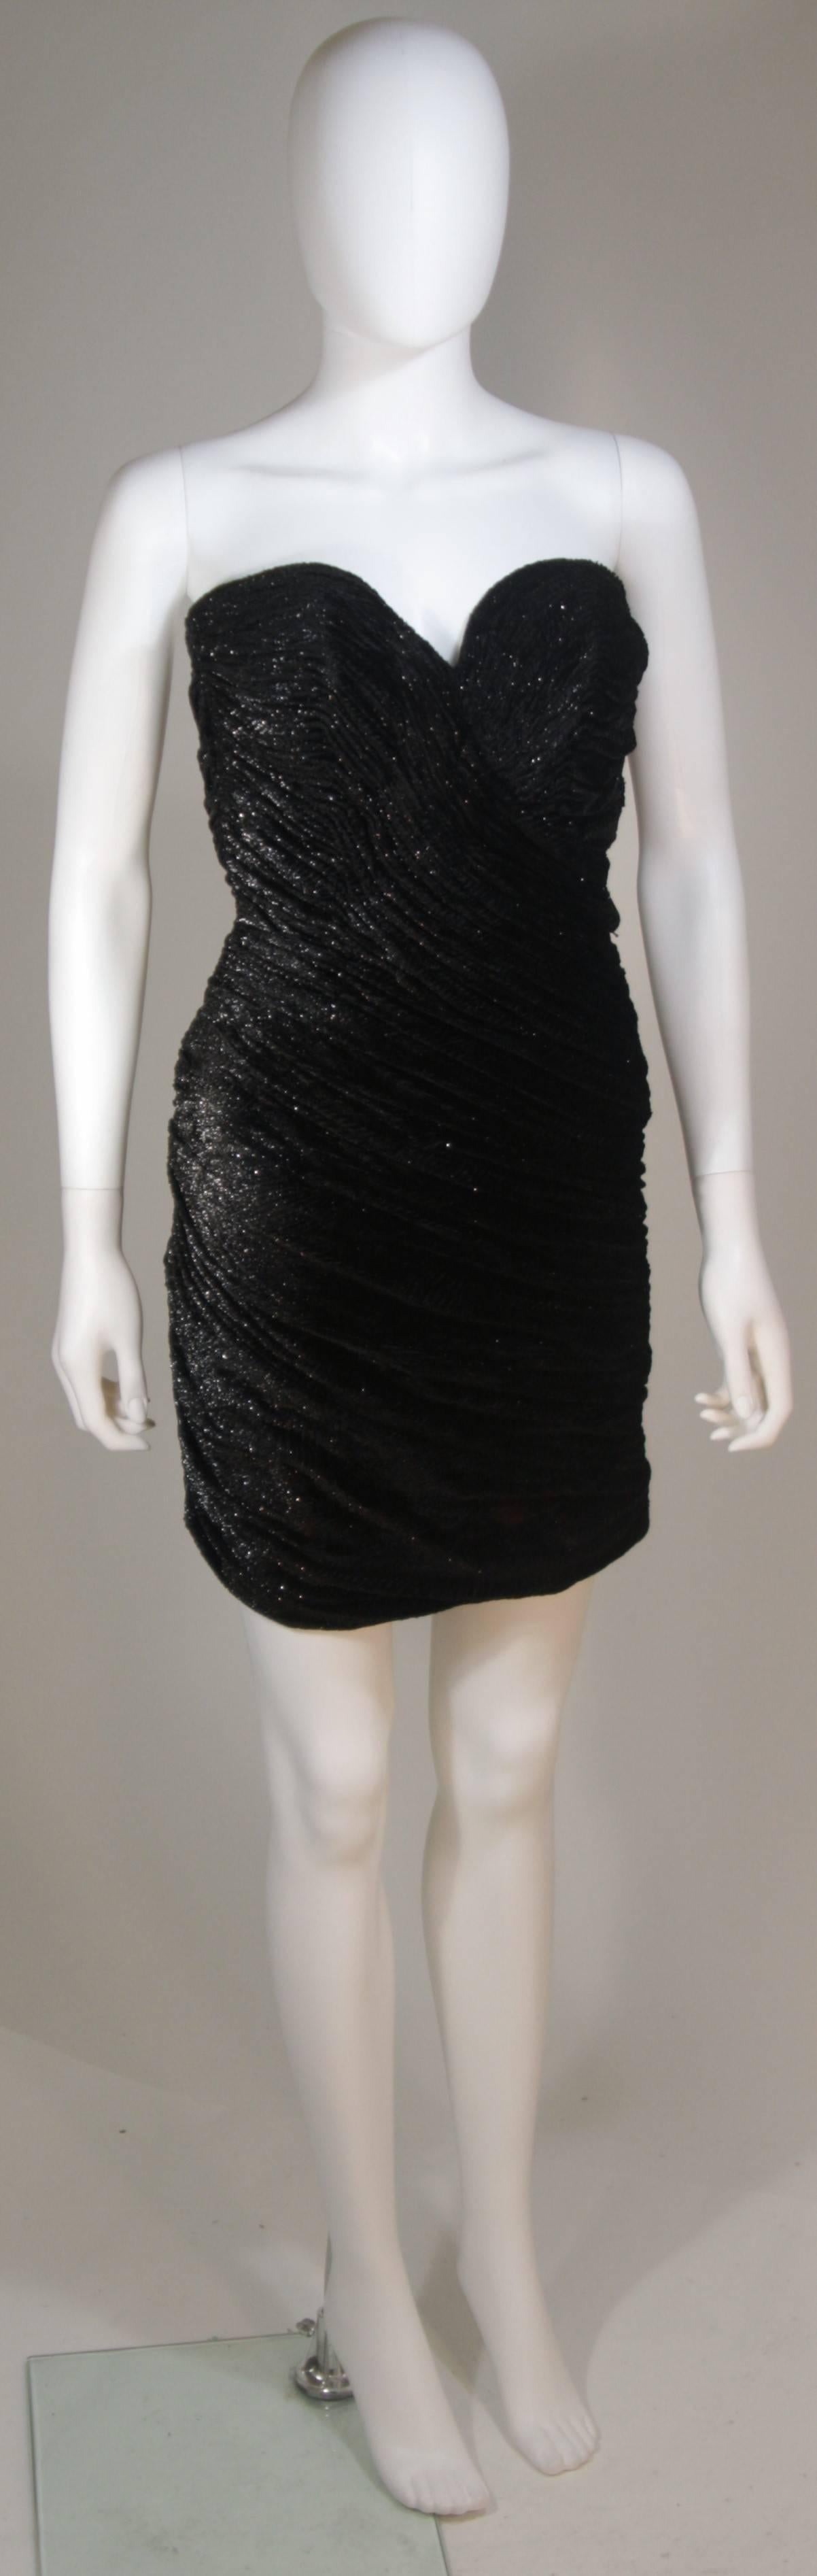  This Vicky Tiel cocktail dress is composed of a black on black lurex blended velvet. The dress features a sweetheart neckline, boned bodice, and allover ruched design. There is a center back zipper. In excellent vintage condition. 

**Please